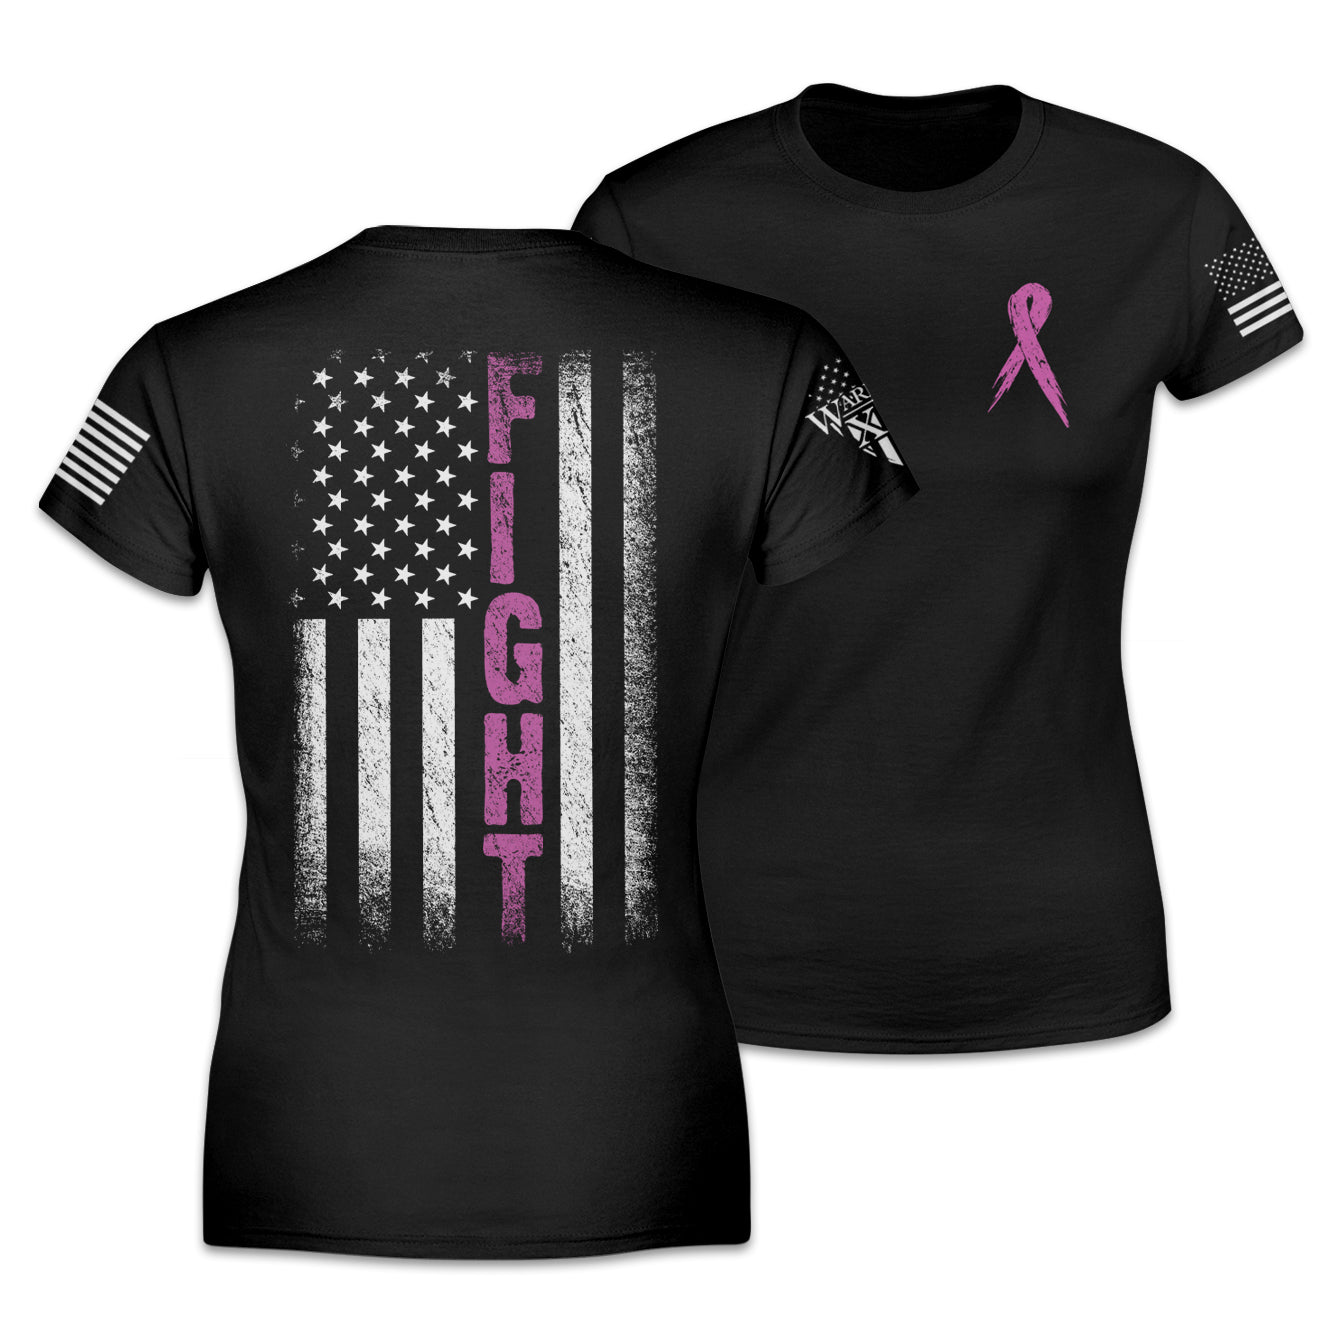 Breast Cancer Awareness Month T-Shirt Design Ideas with Sayings